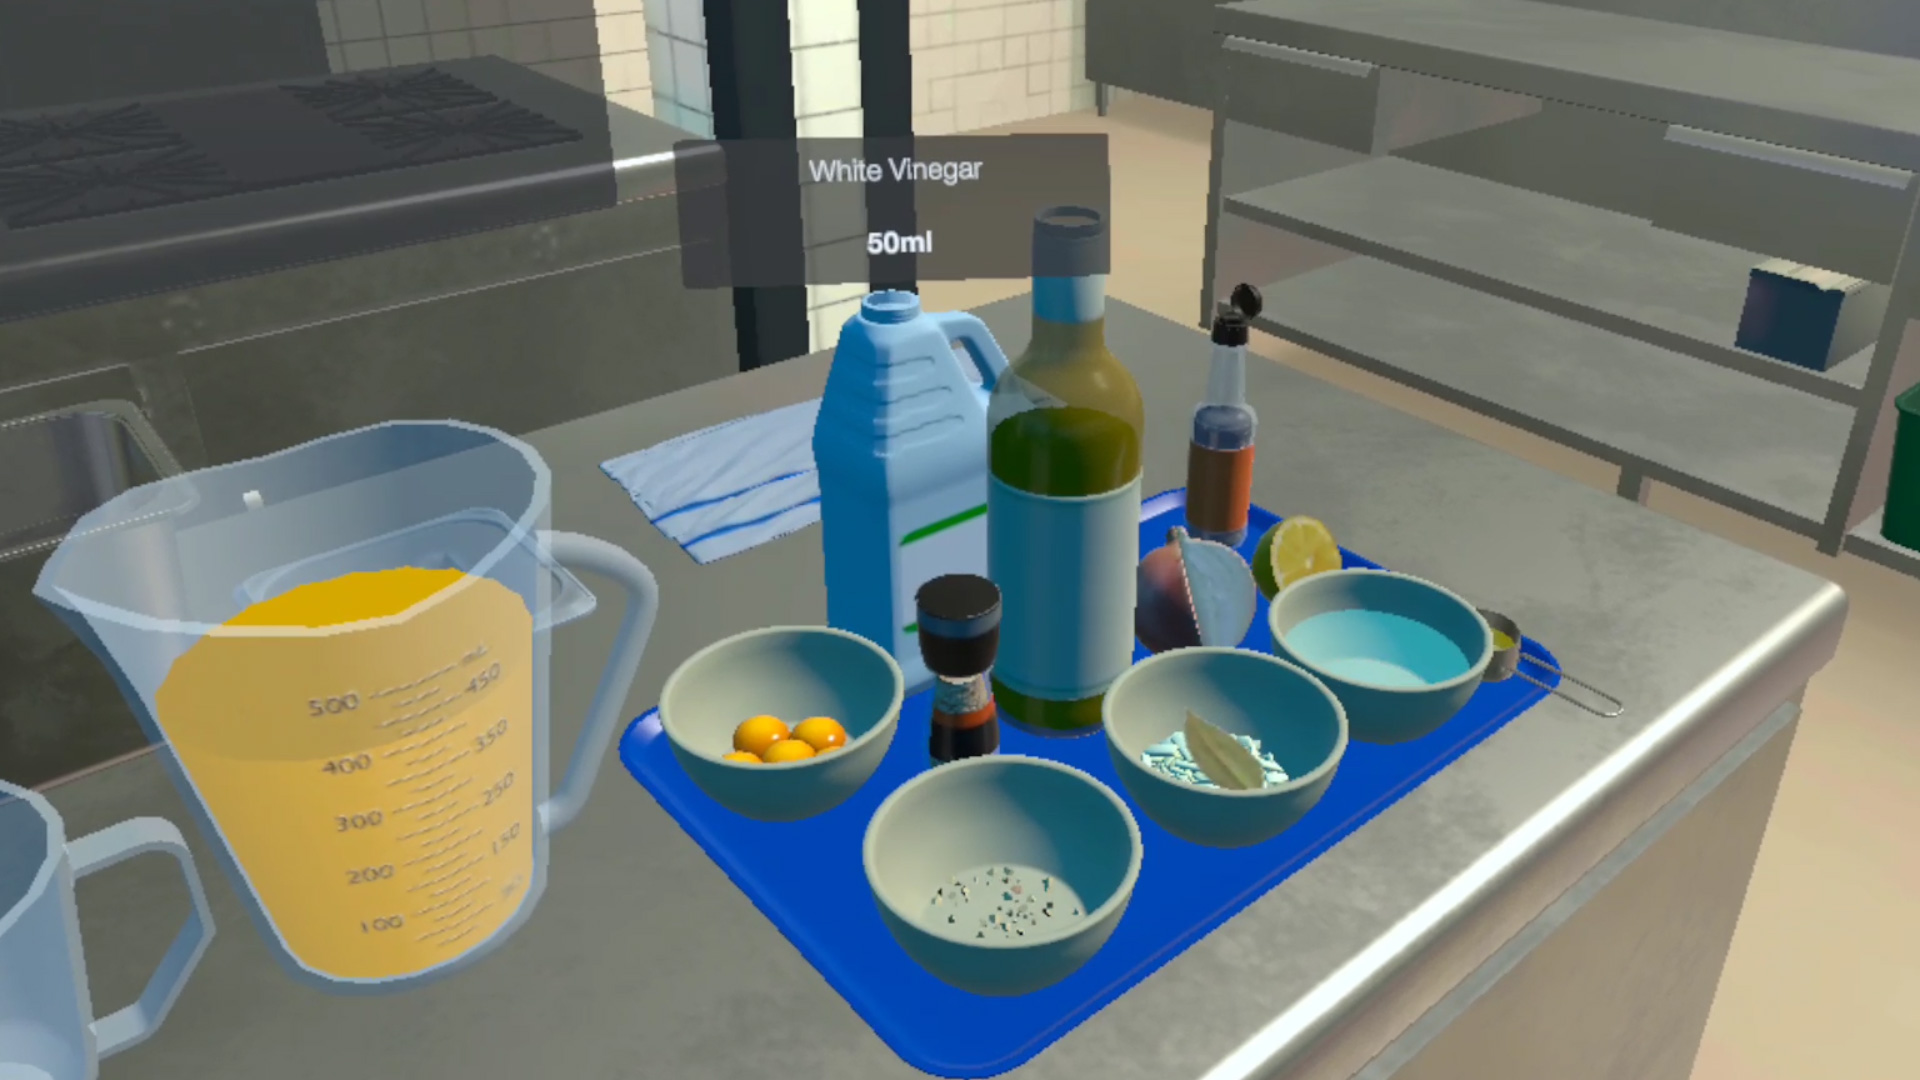 A screengrab of the VR Cooking Training showing the label for the White vinegar appearing above the ingredient